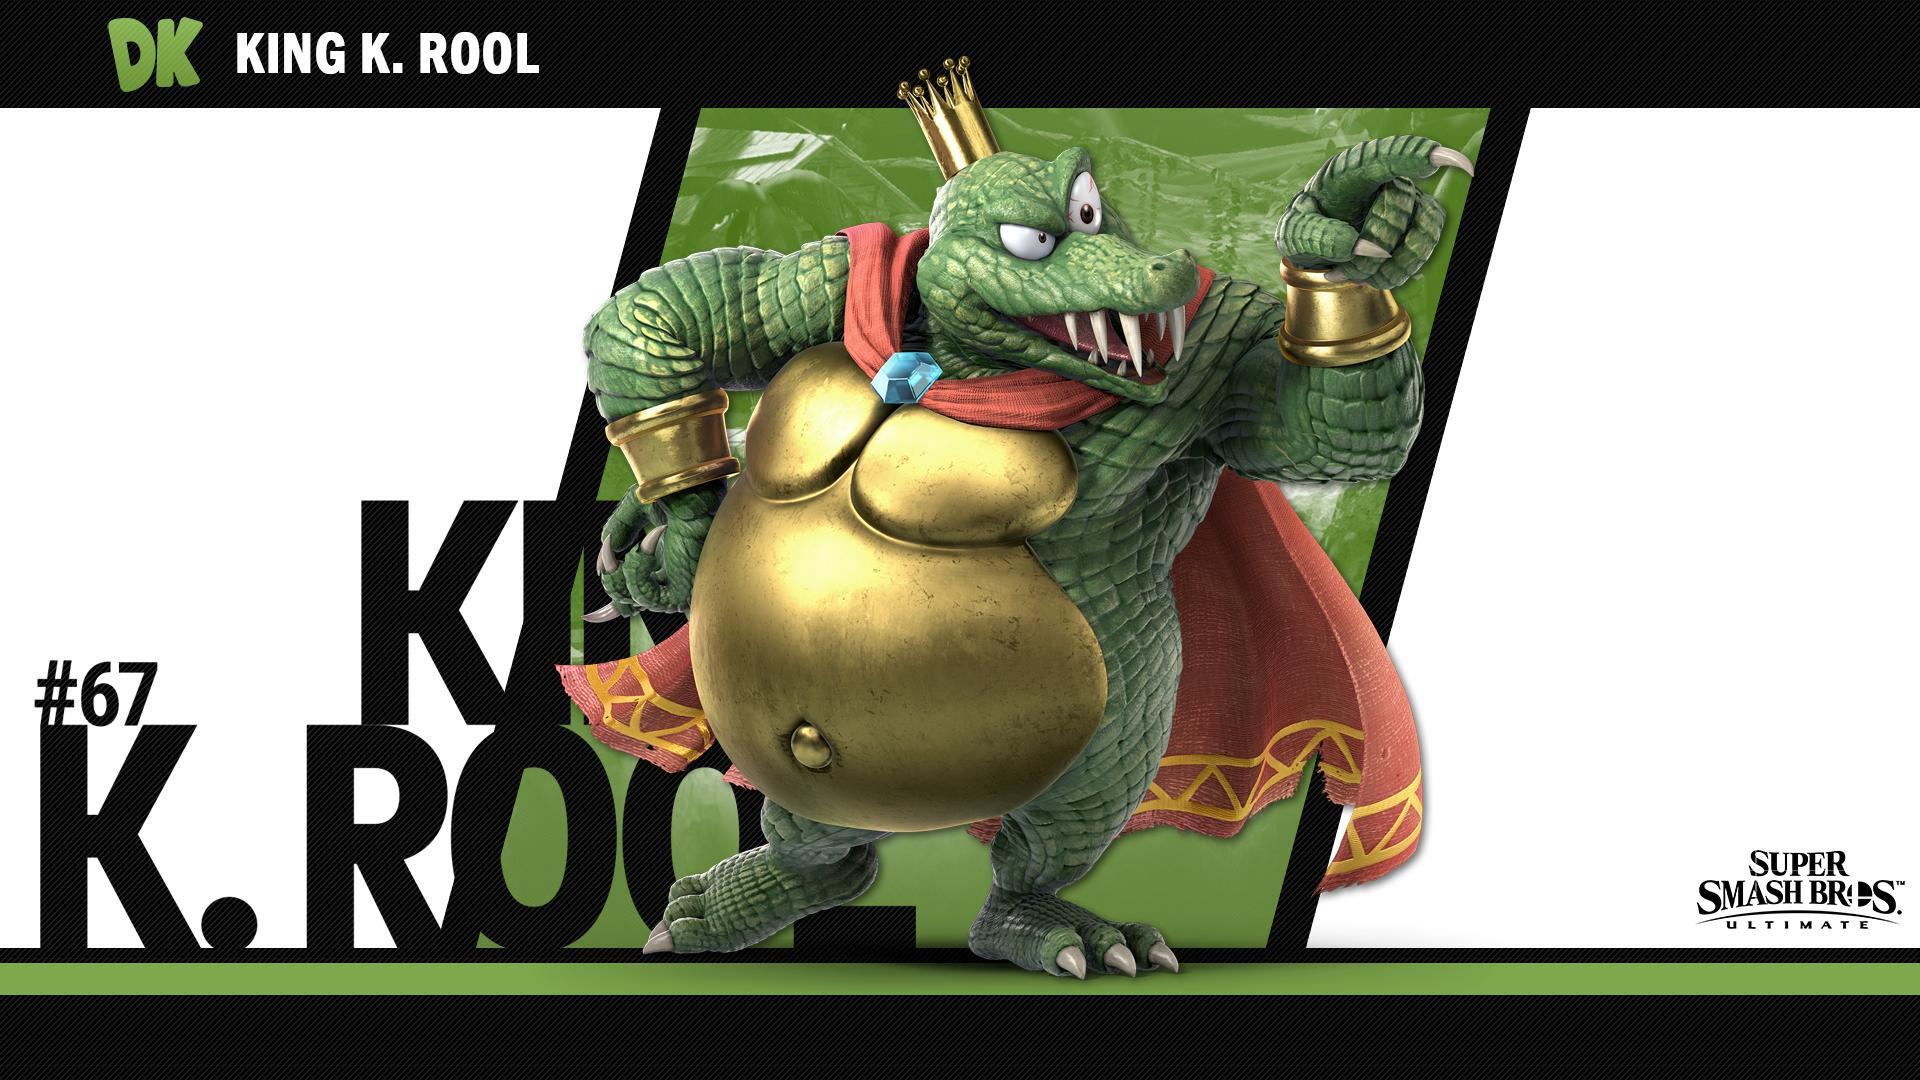 Wallpaper Of King K. Rool From Super Smash Bros. Ultimate